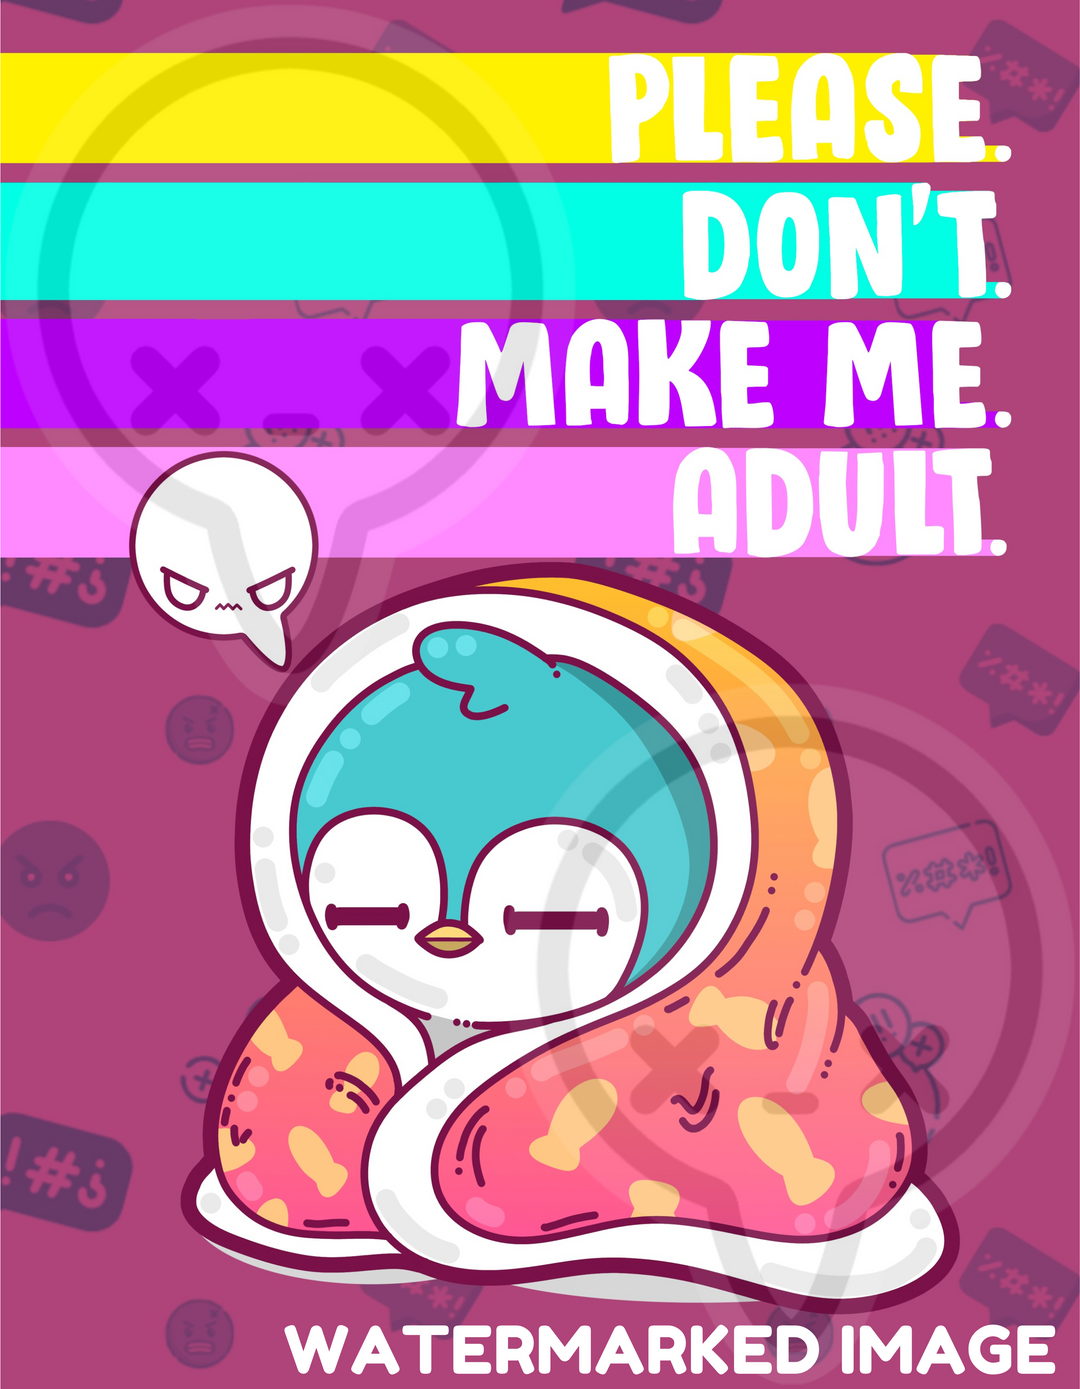 PLEASE DONT MAKE ME ADULT - Throw Blanket 60 in X 80 in - ChubbleGumLLC